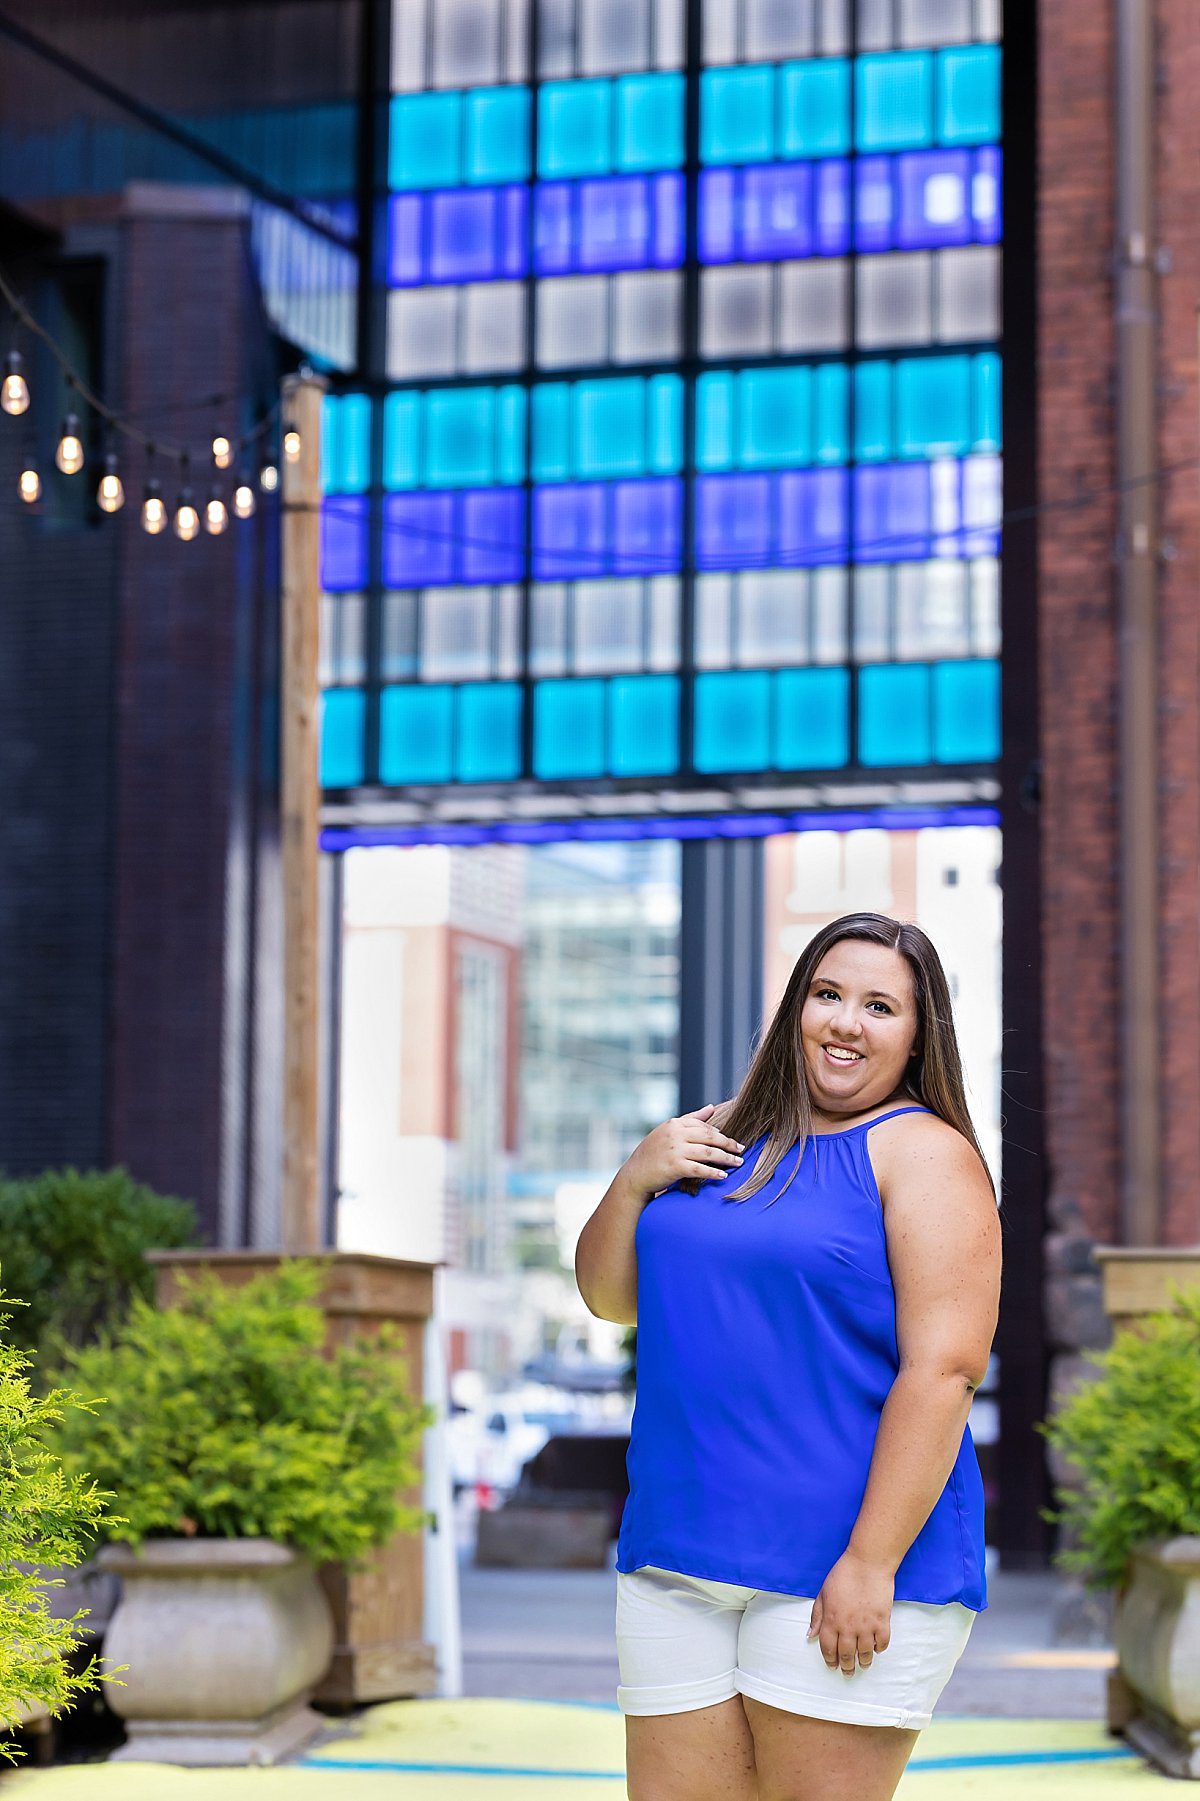 image of a senior girl in a blue top with a bright blue light installation above her. She's smiling as she stands in an outdoor garden in downtown Pittsburgh.